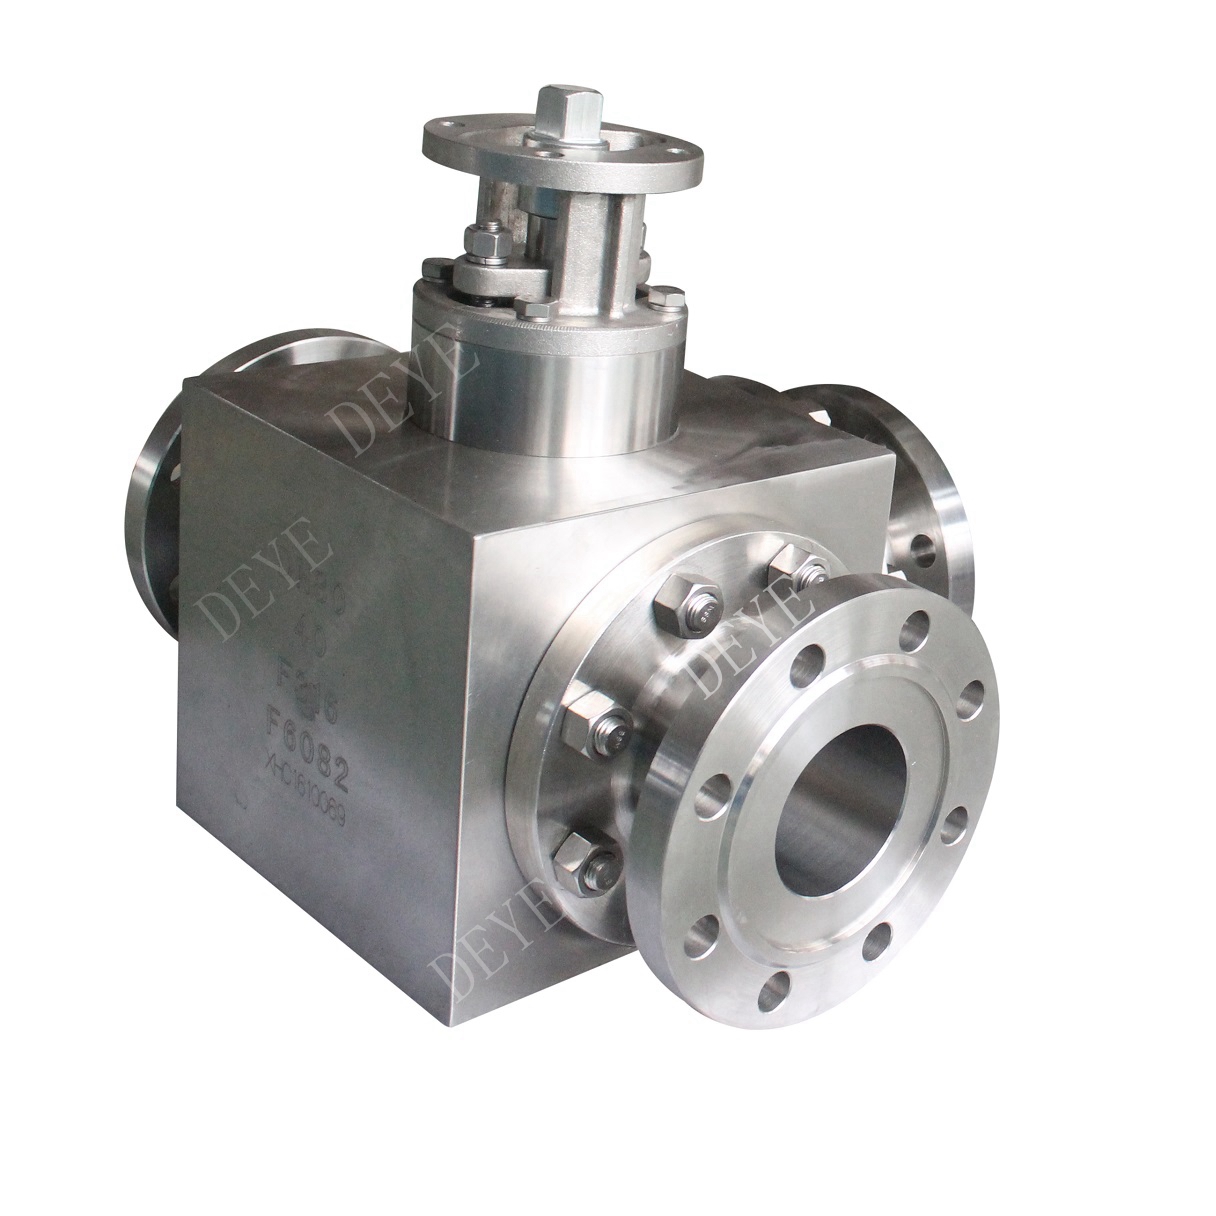 China Supplier Dn600 24inch Gate Valve -
  300LBS stainless steel 3-way ball valve with Flanged ends  BV-300-3WYF – Deye